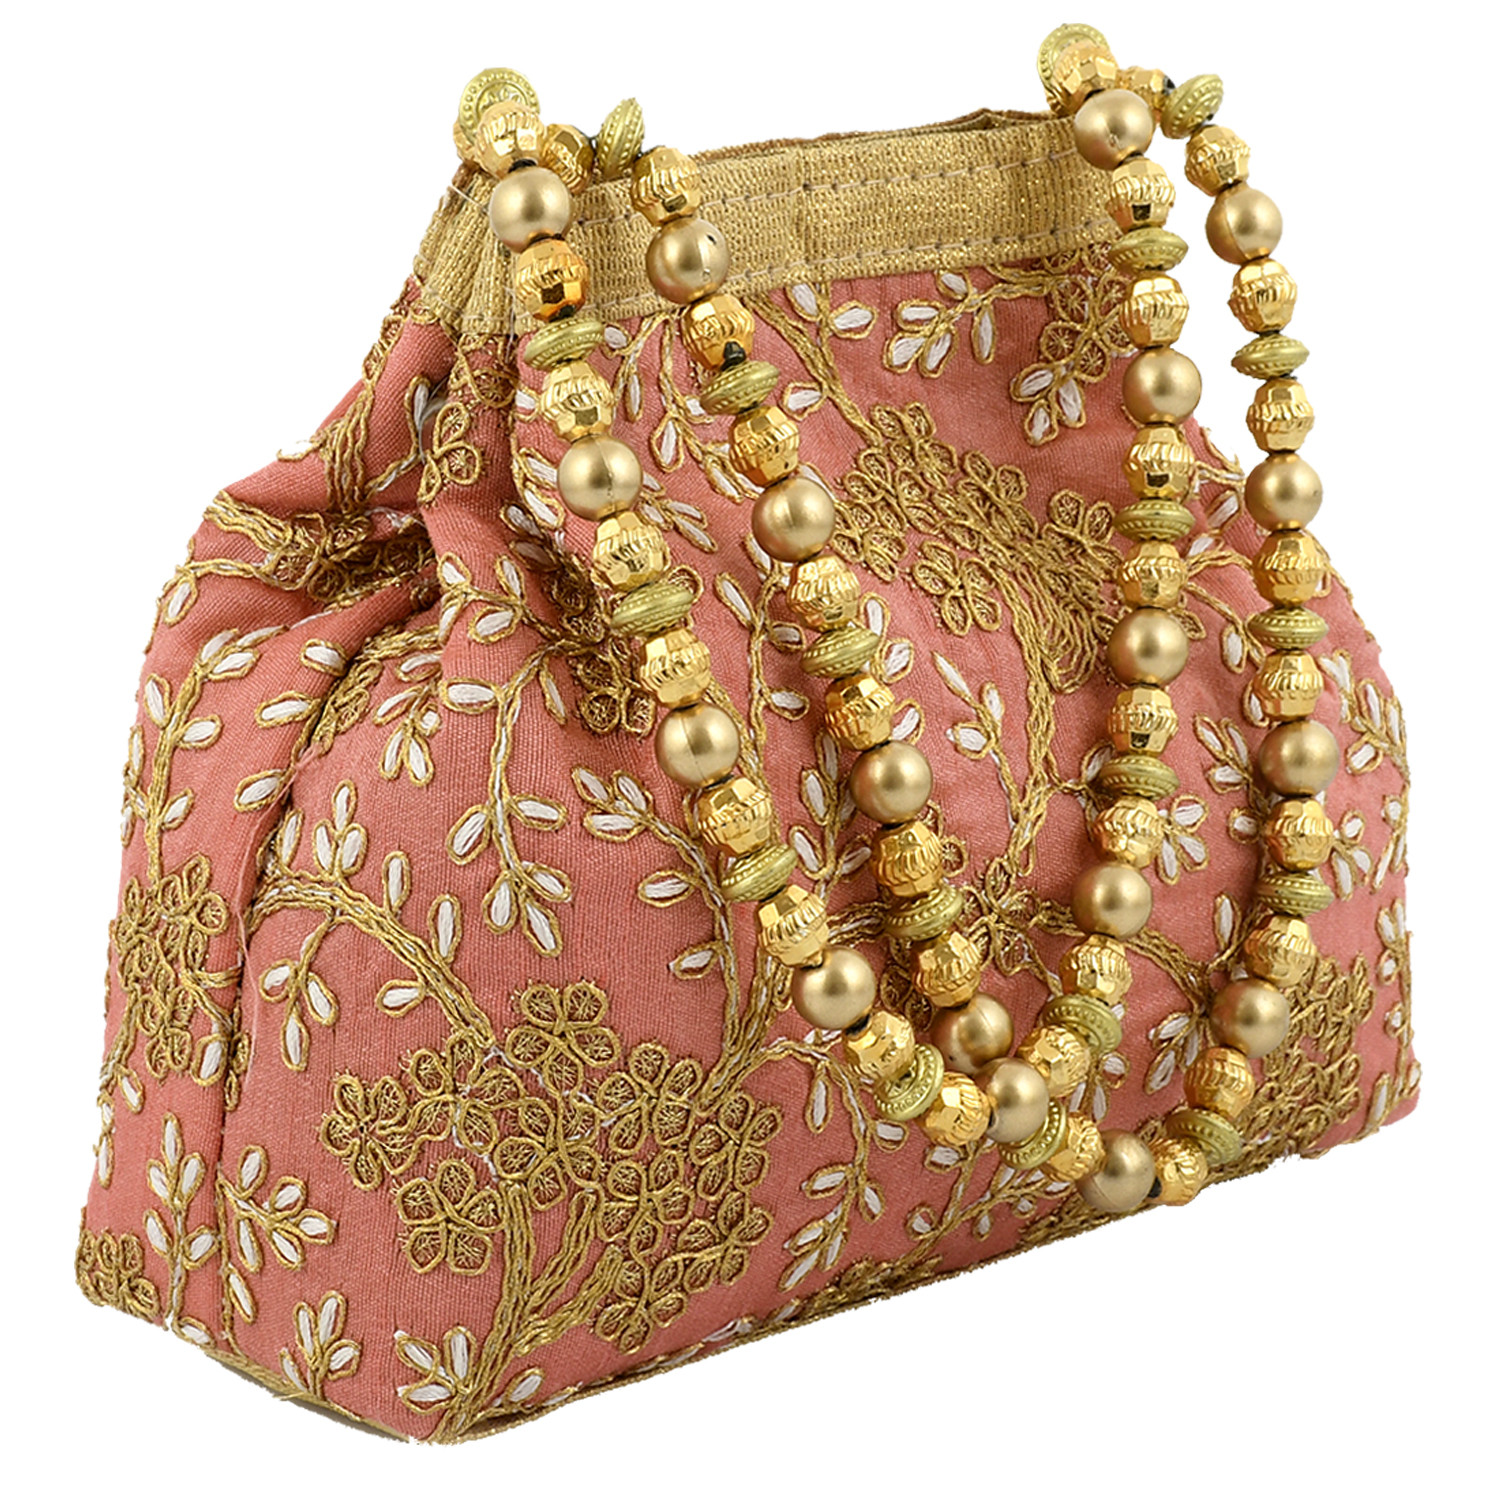 Kuber Industries Polyester 2 Pieces Embroidered Potli Batwa Pouch Bag for Women (Peach & Black)